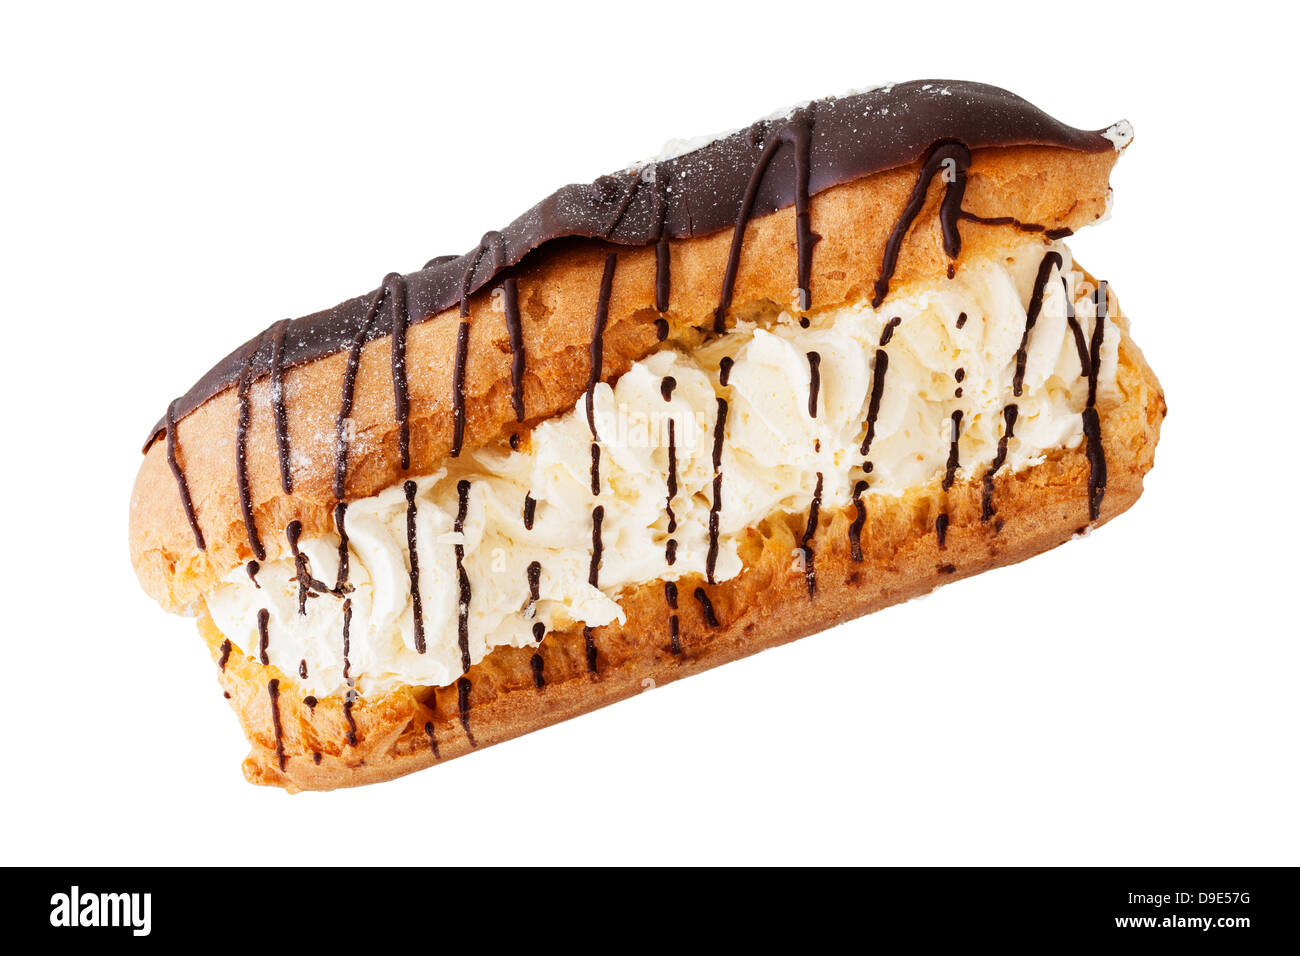 A home made Chocolate Eclair on a white background Stock Photo